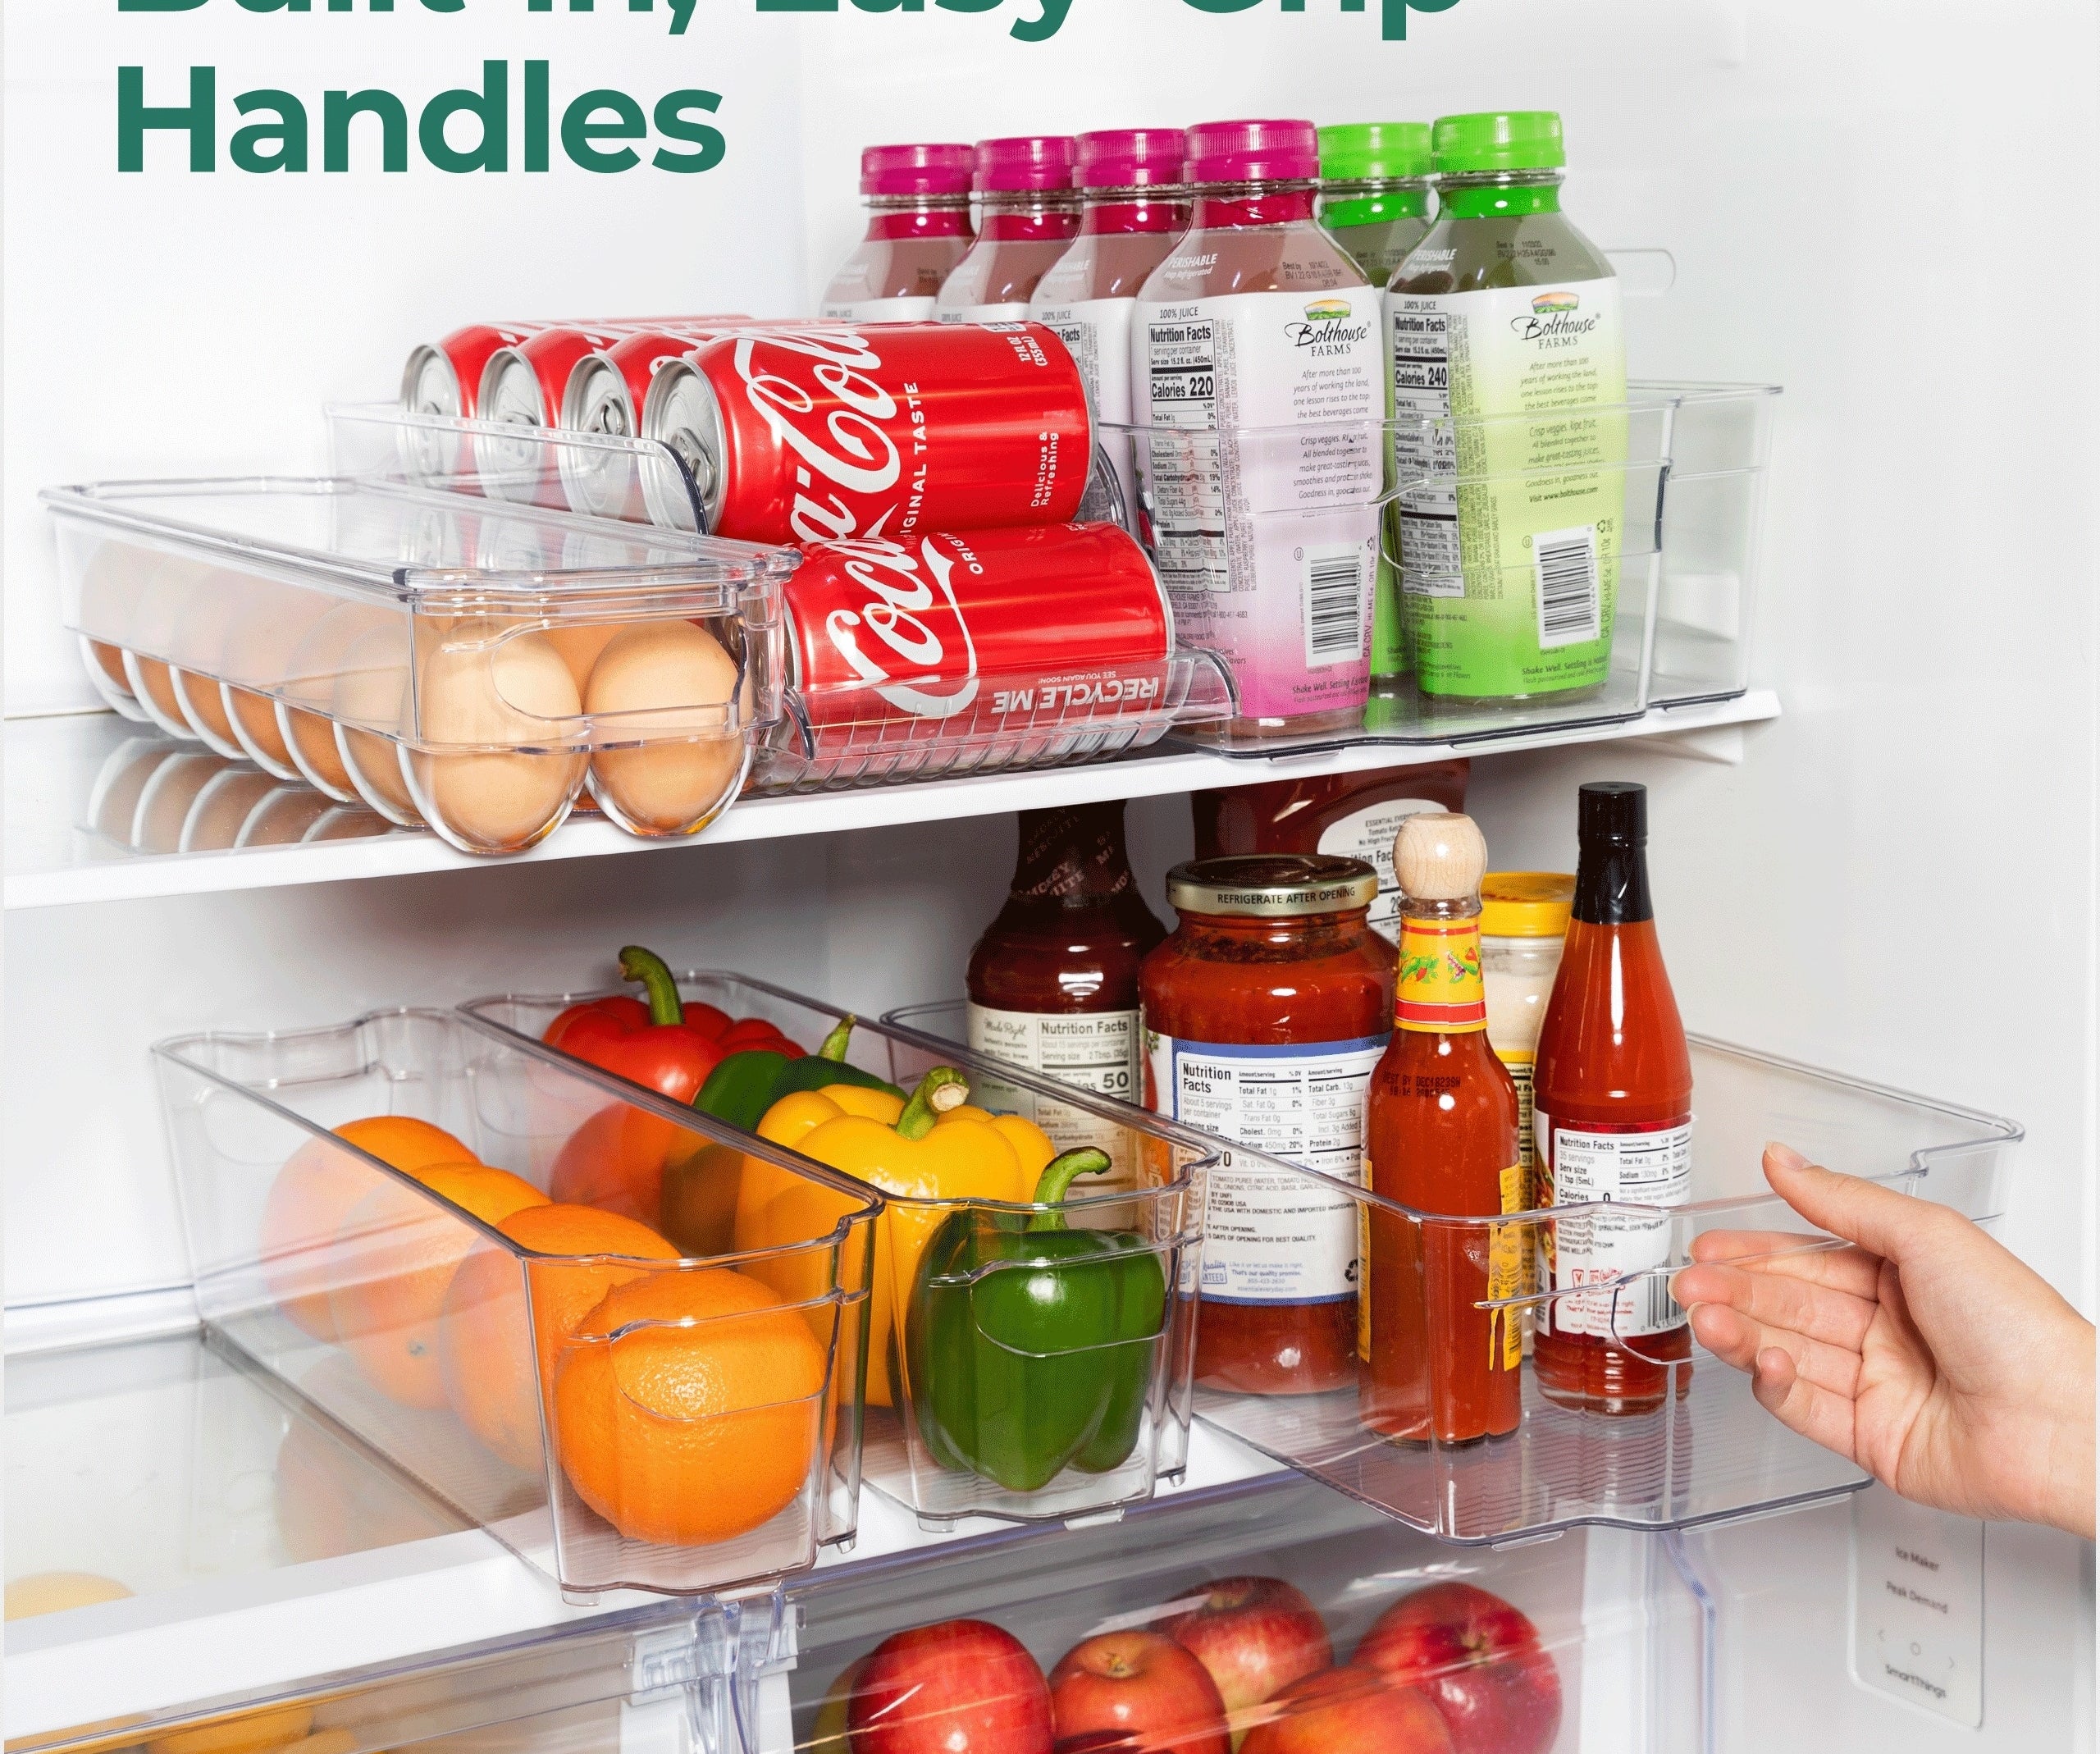 A hand opening a clear fridge drawer full of various fruits and organized groceries